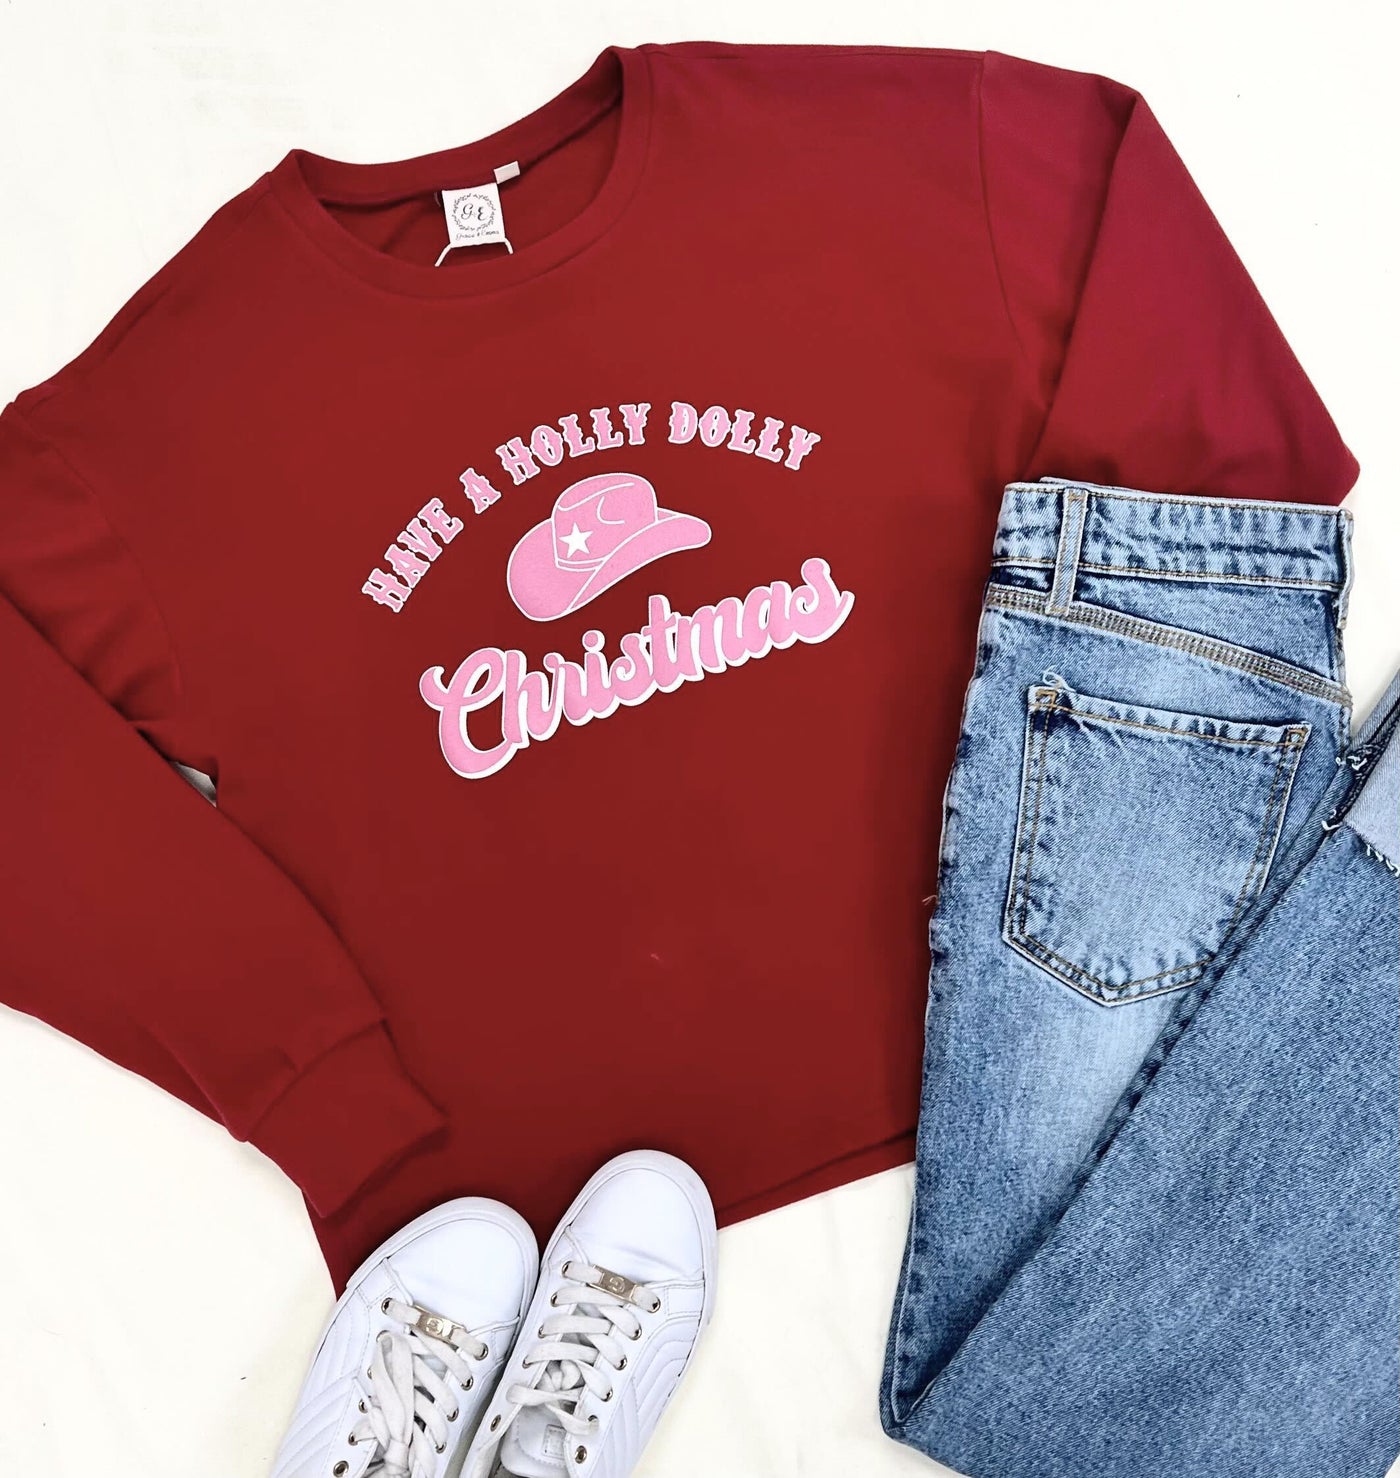 "Have a Holly Dolly Christmas" on Red Crazy Cozy Microfleece Crewneck